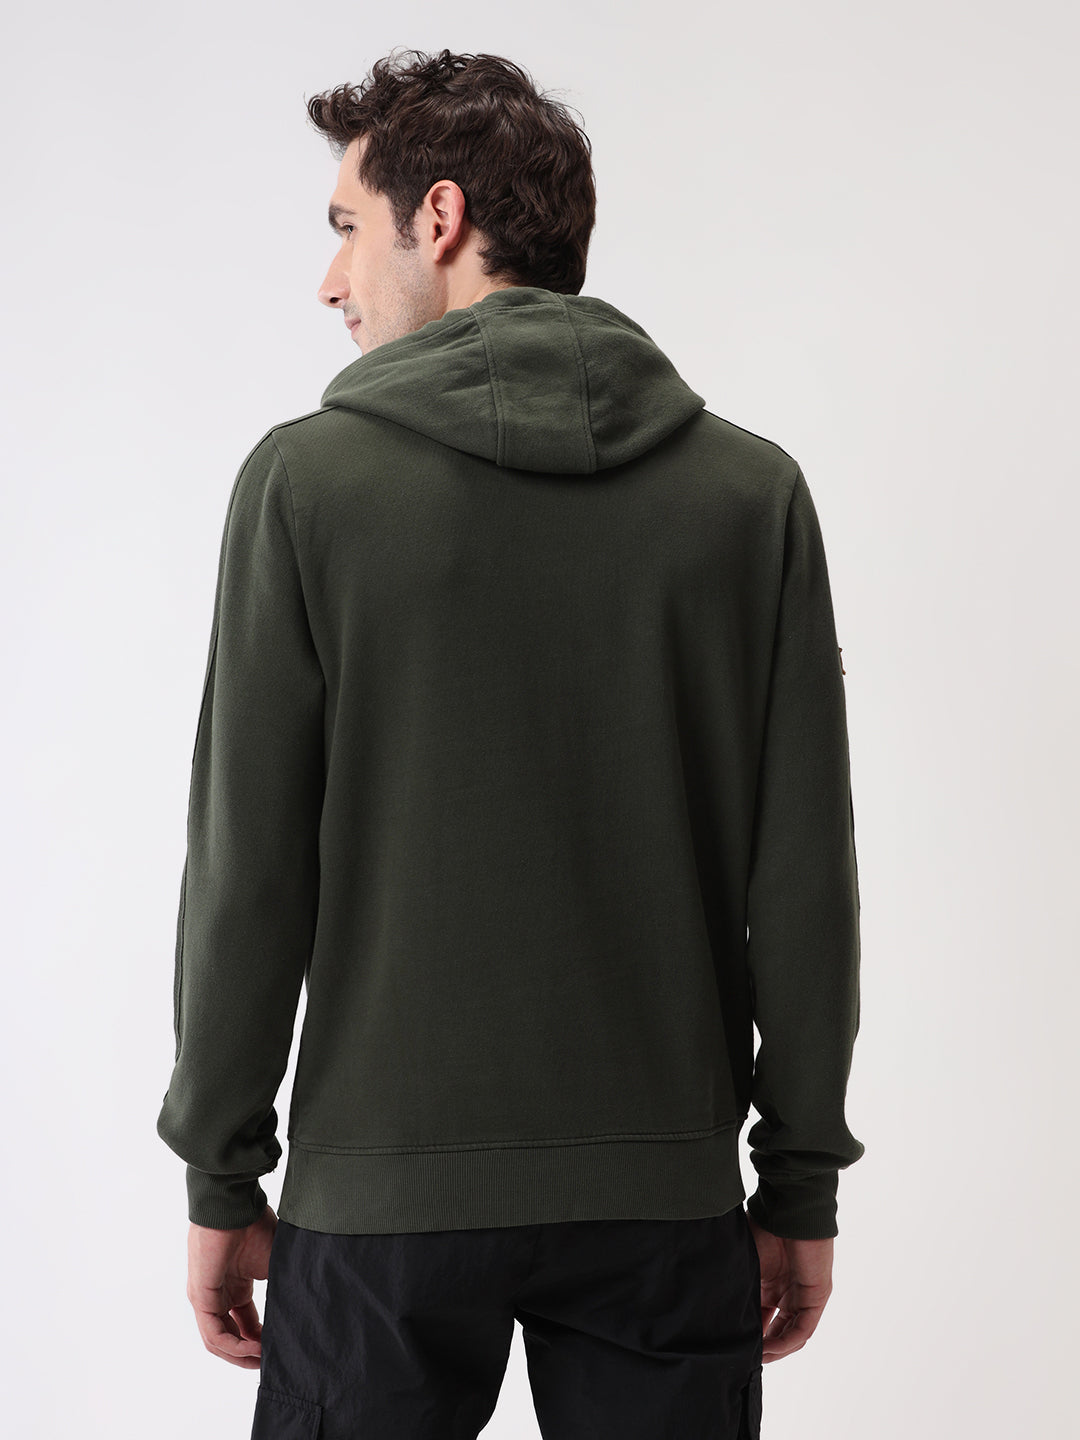 Indian Infantry By A47 Olive Hoodie